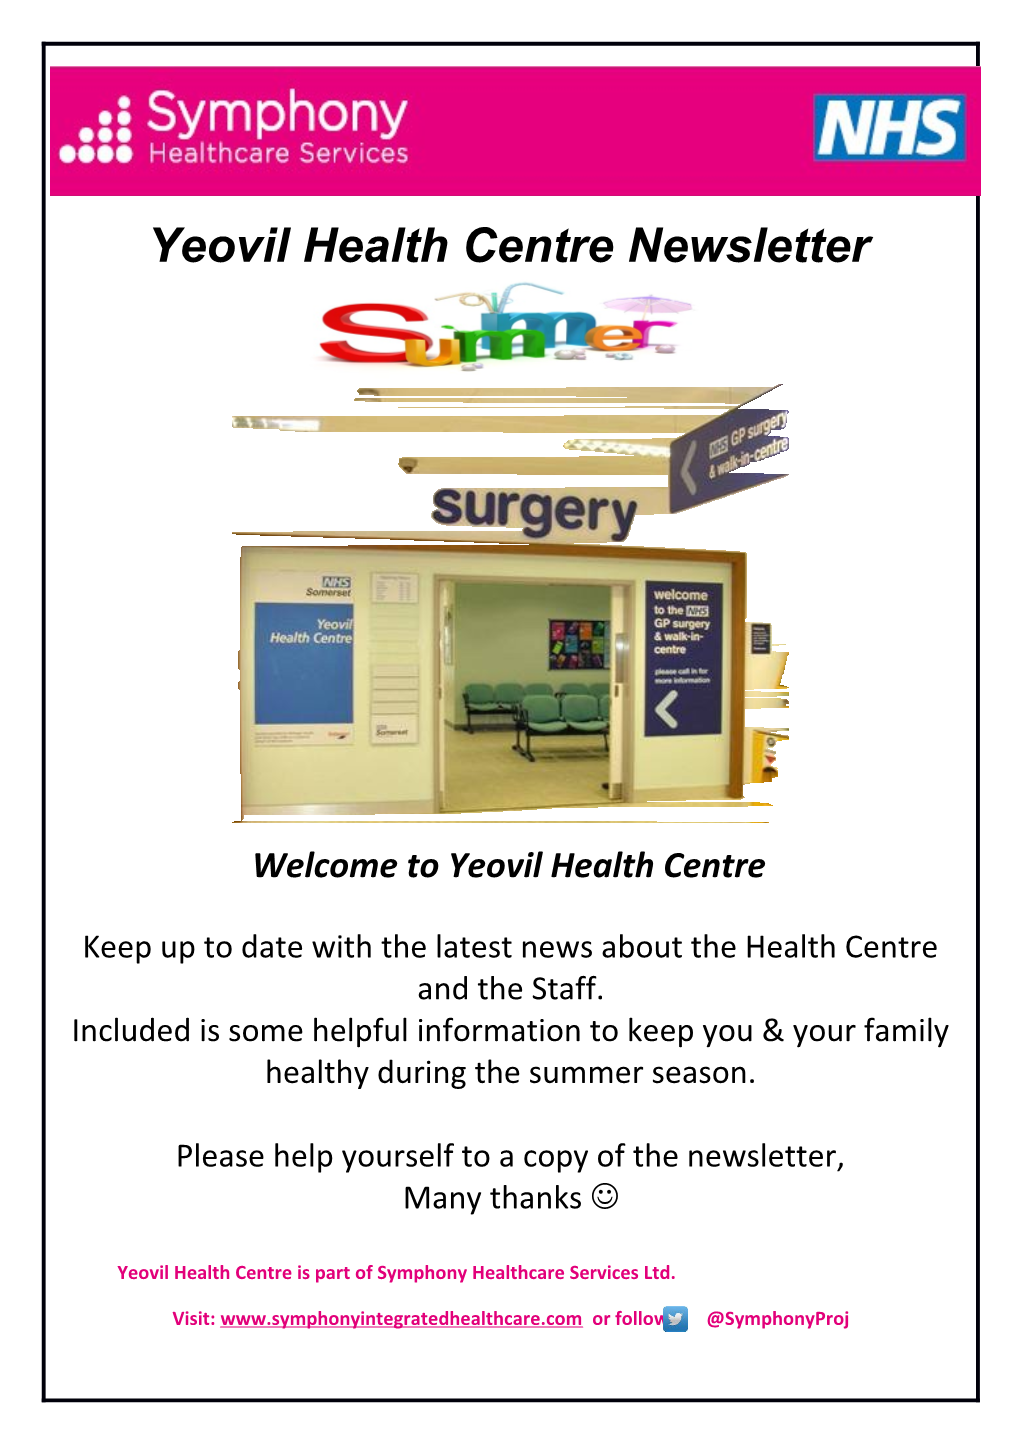 Welcome to Yeovil Health Centre